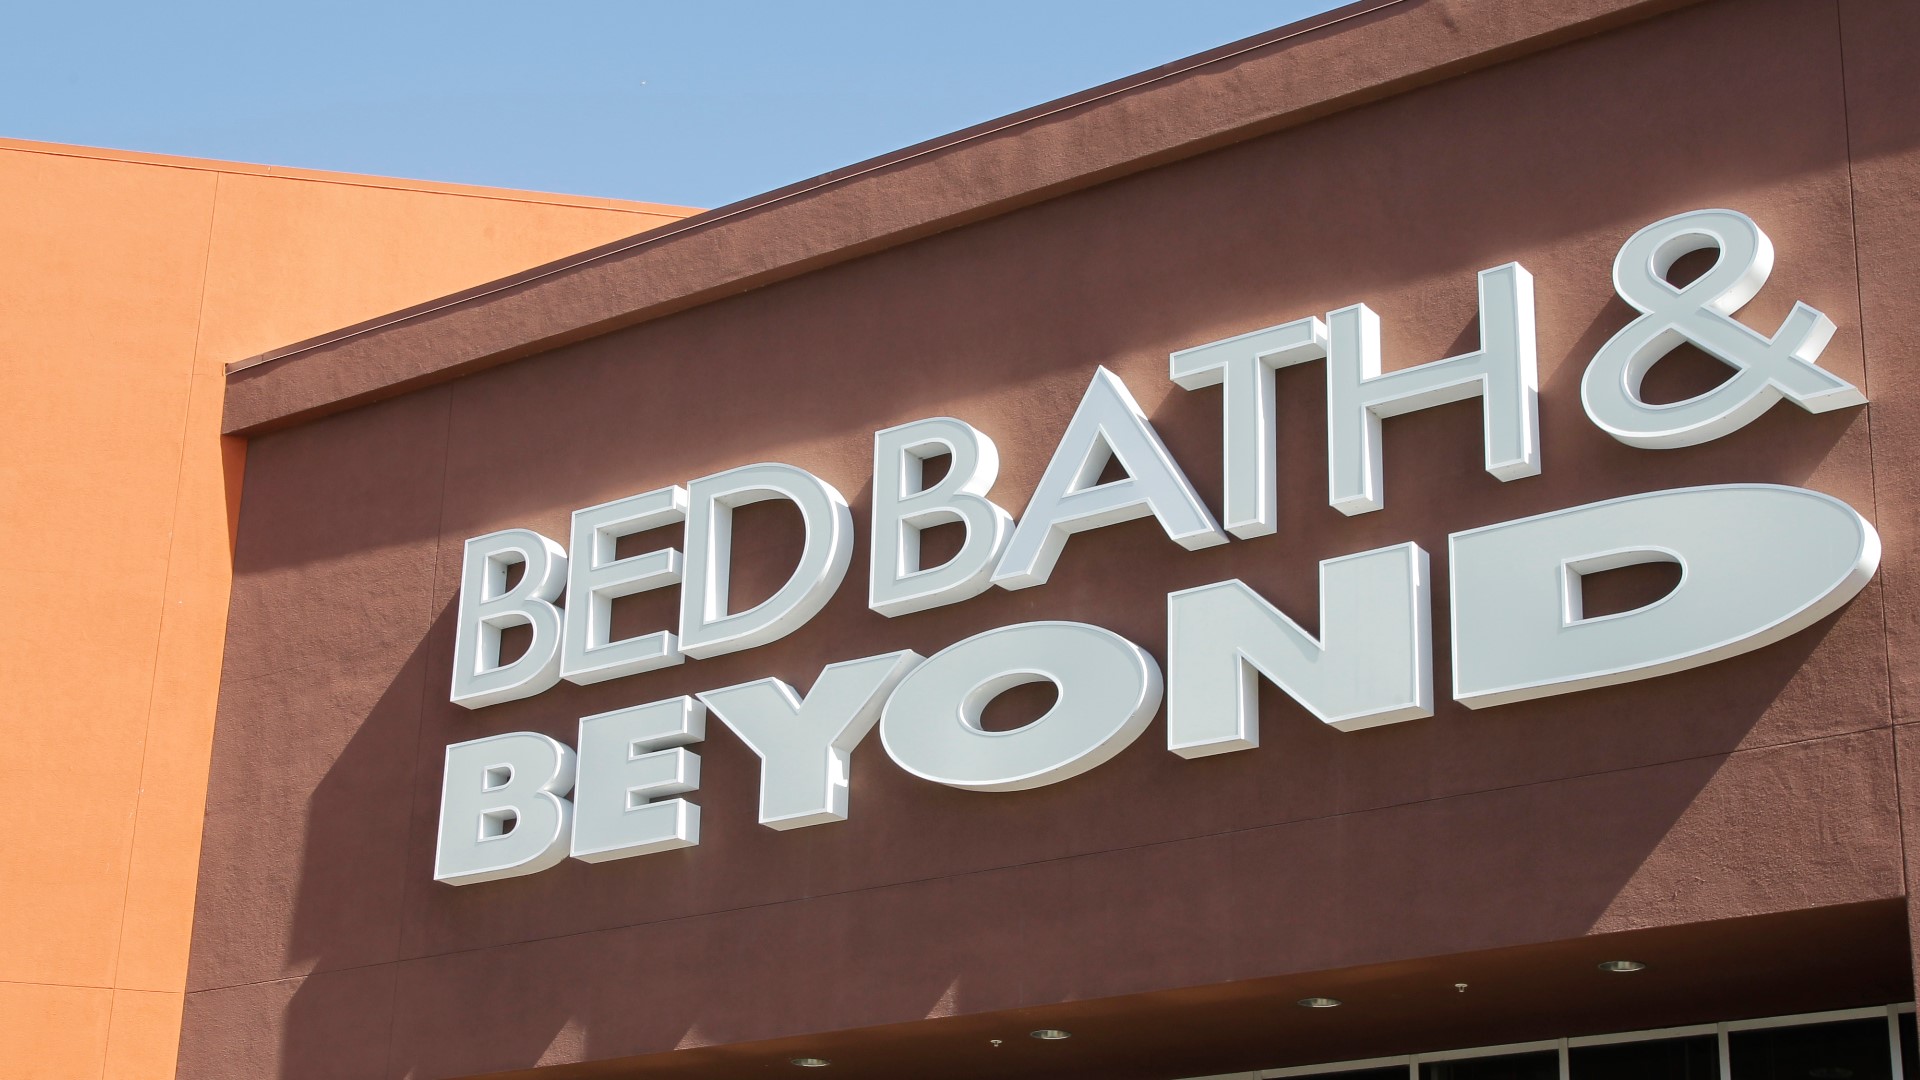 As of May, the retailer operated a total of 955 stores, including 769 Bed Bath & Beyond stores, 135 buybuy Baby stores and 51 stores under other names.